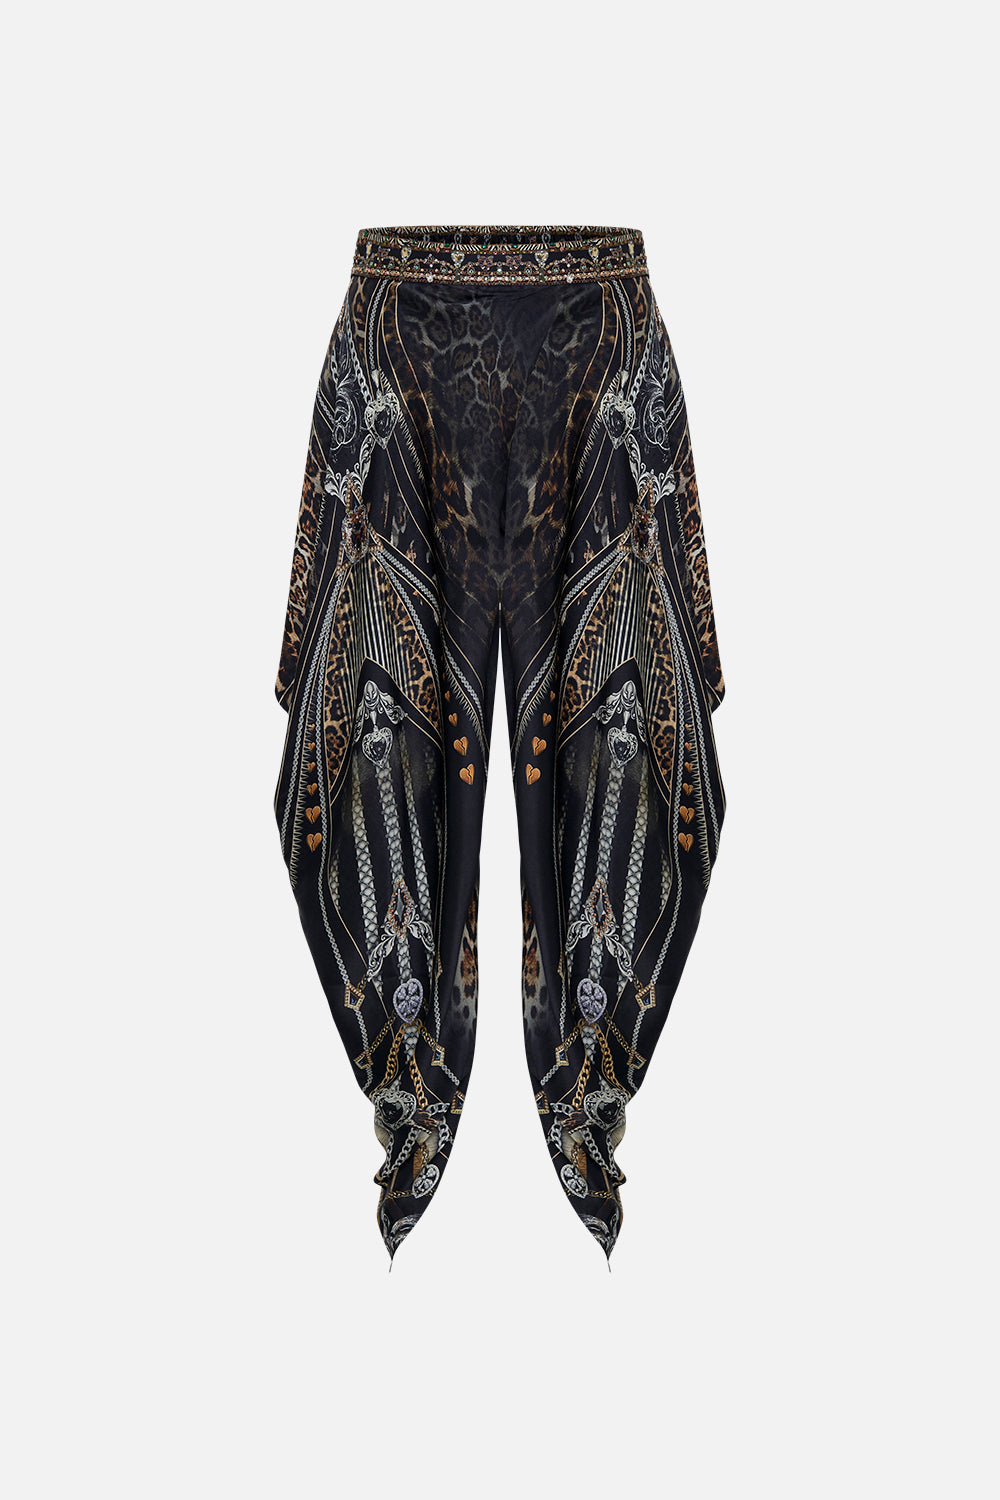 Product view of CAMILLA drapey silk pants  in Chaos In The Cosmos animal print